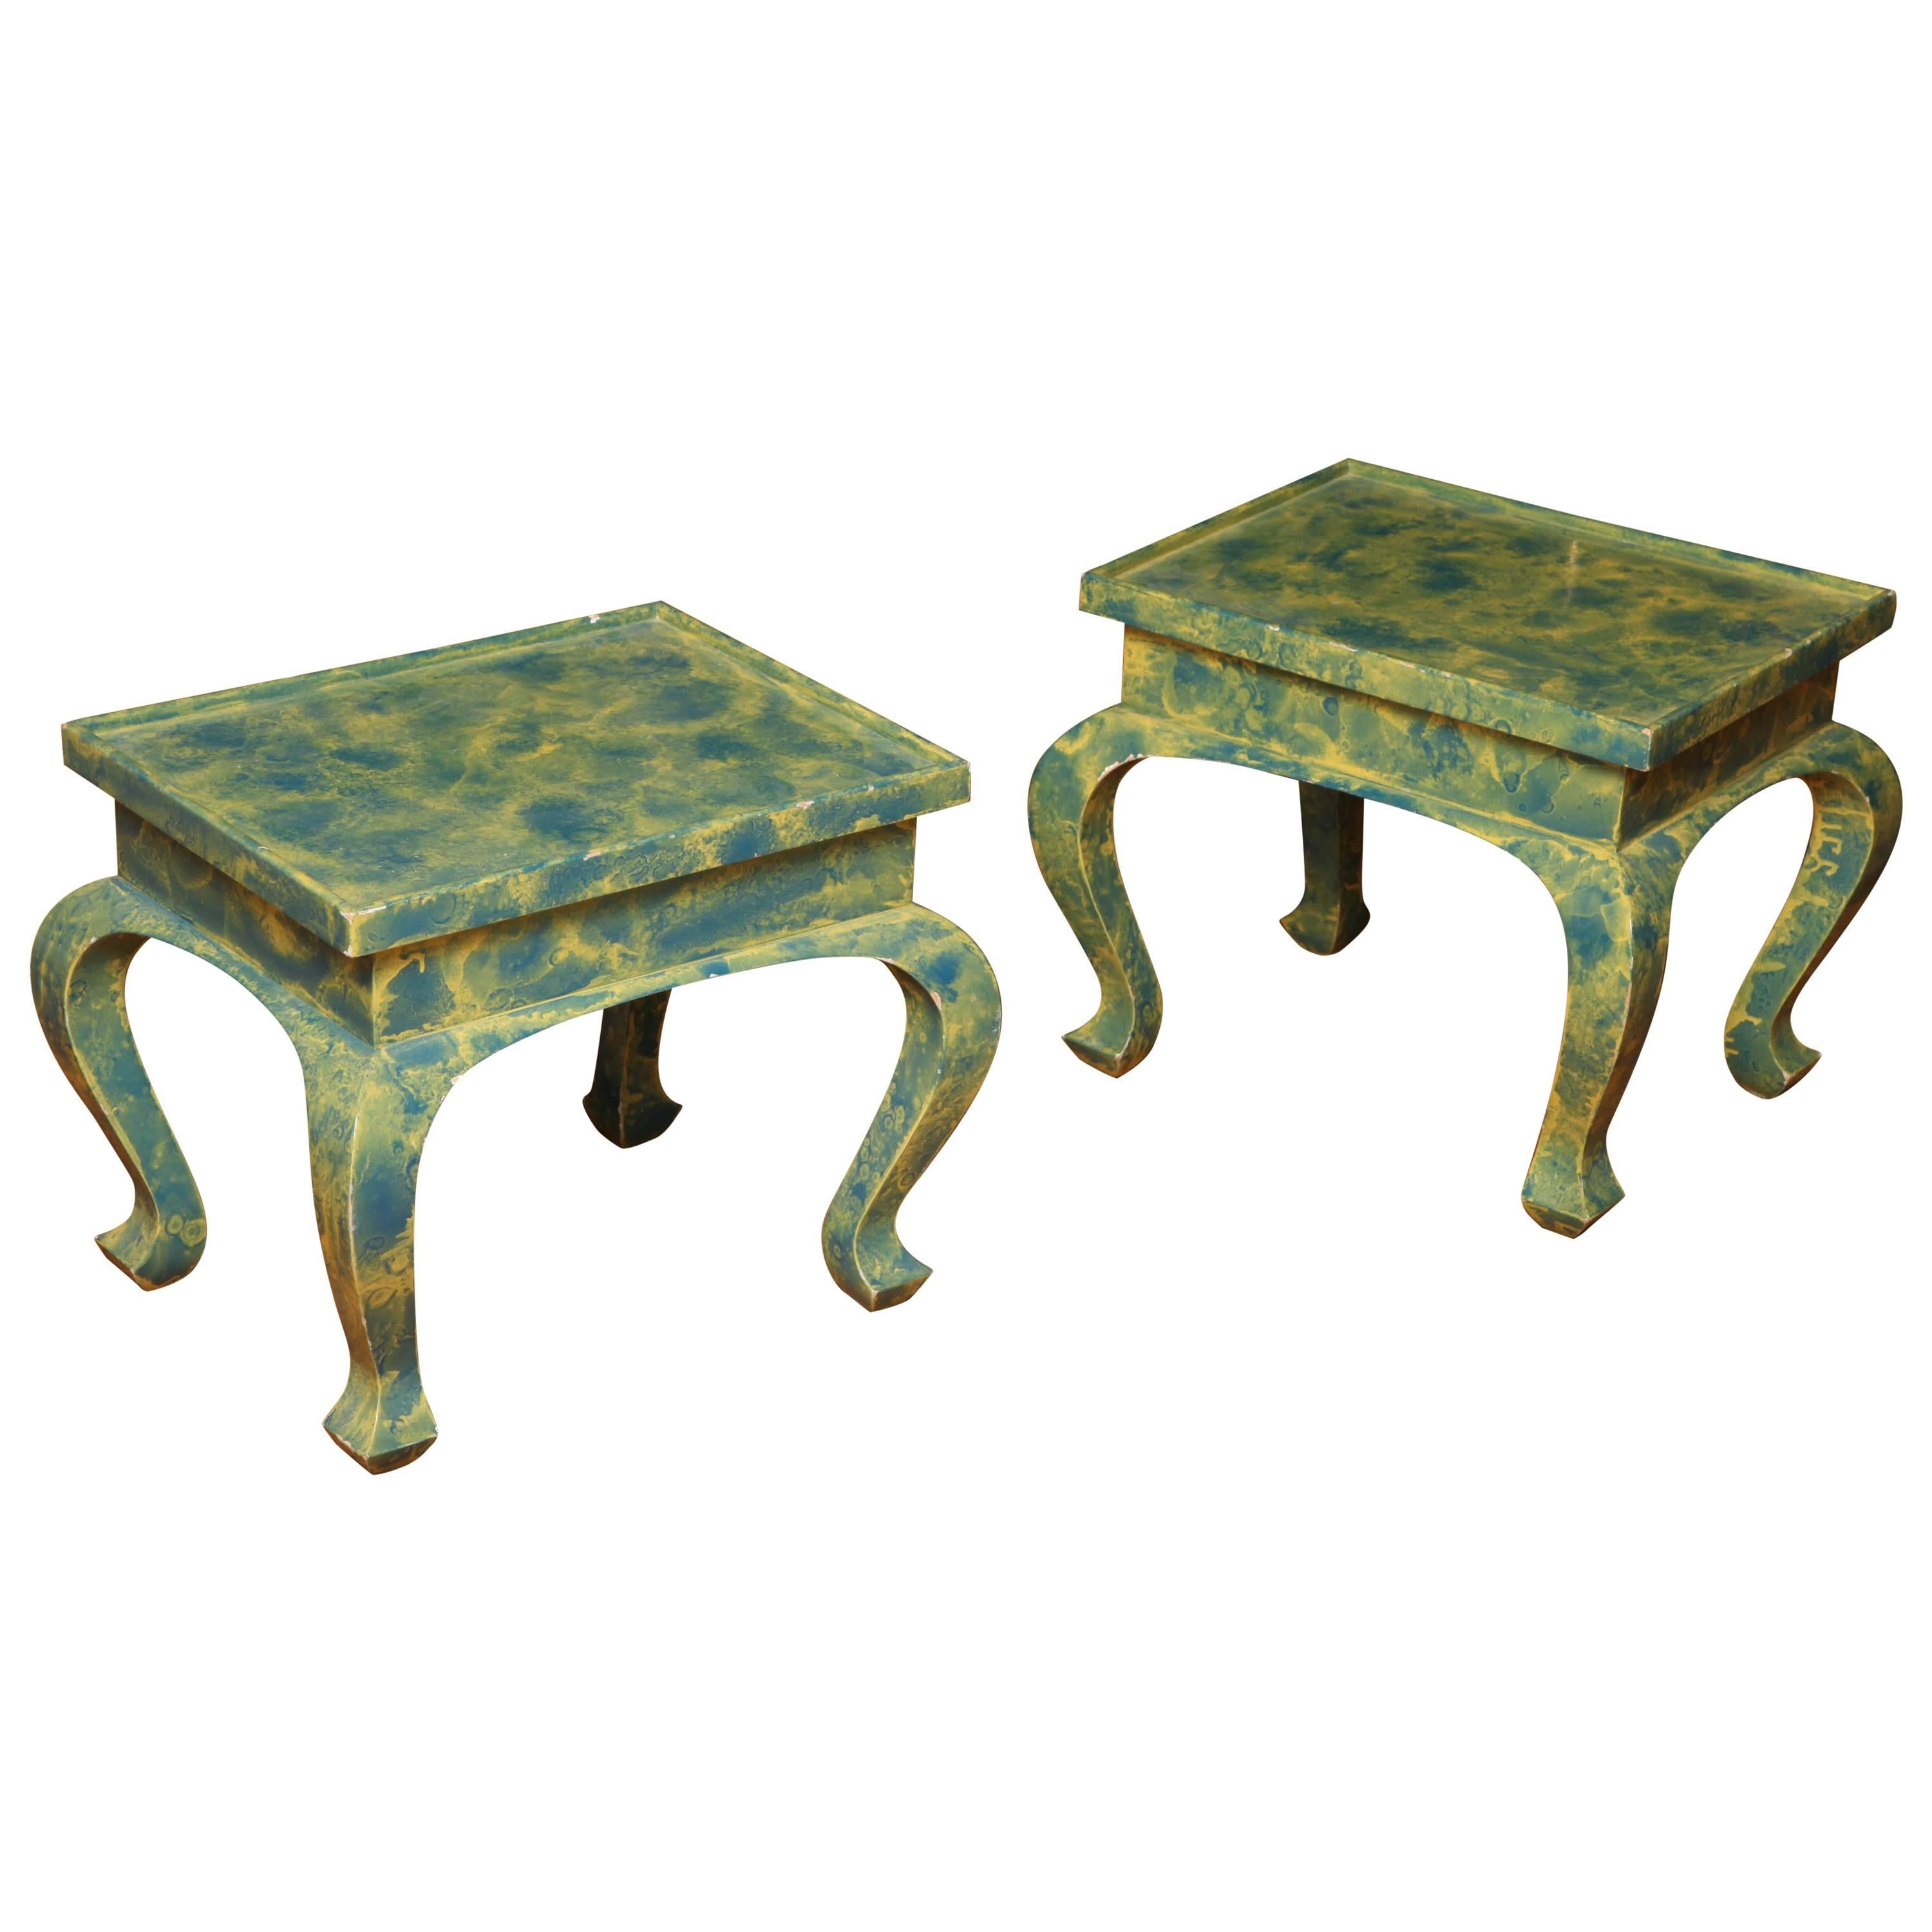 Pair of Small Low Green and Blue Occasional Tables